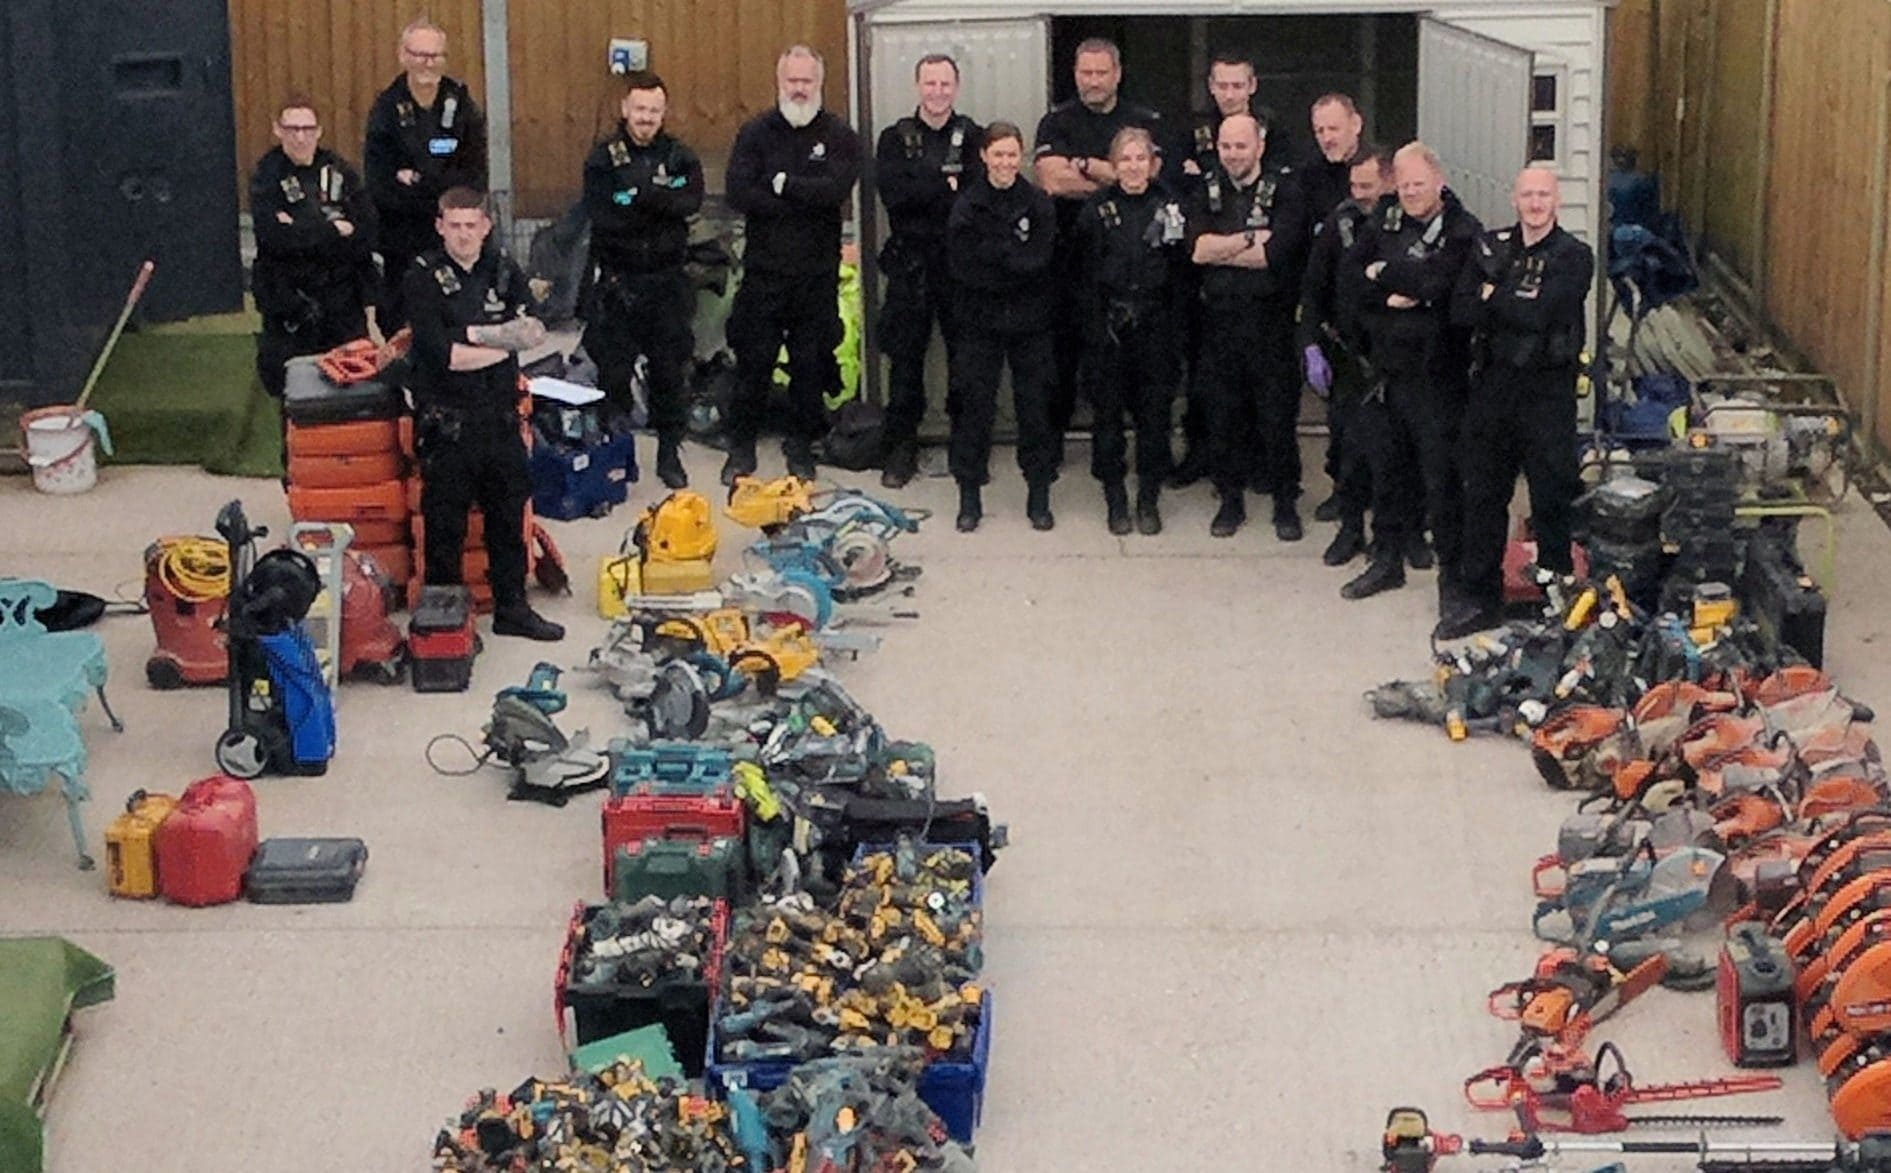 power tool with tracking device leads police to £500,000 hoard